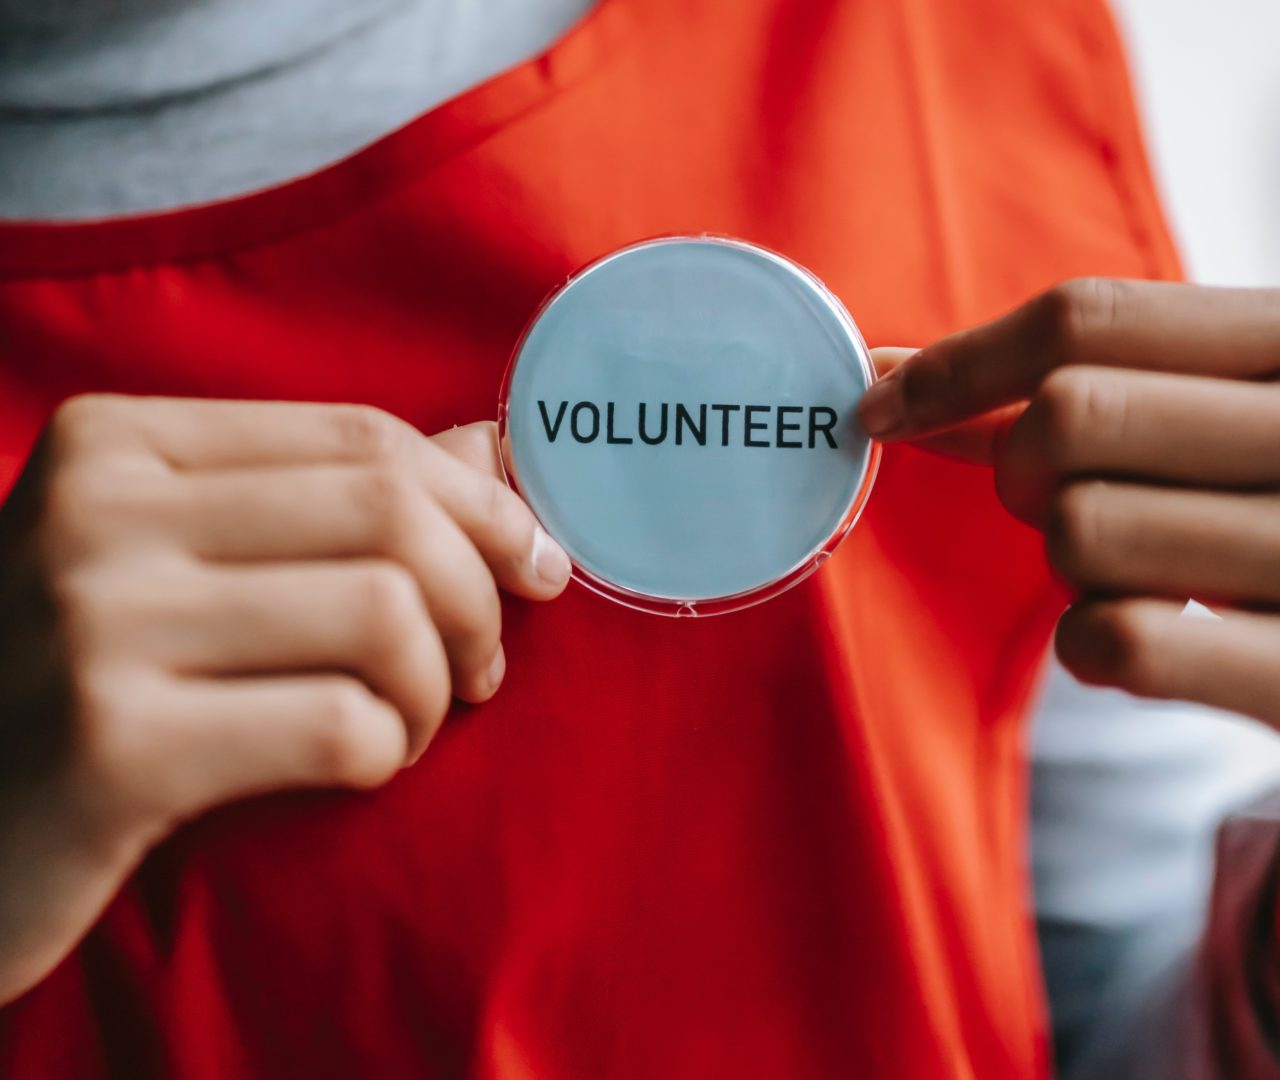 Person holding a badge with the word 'Volunteer' against an orange t-shirt